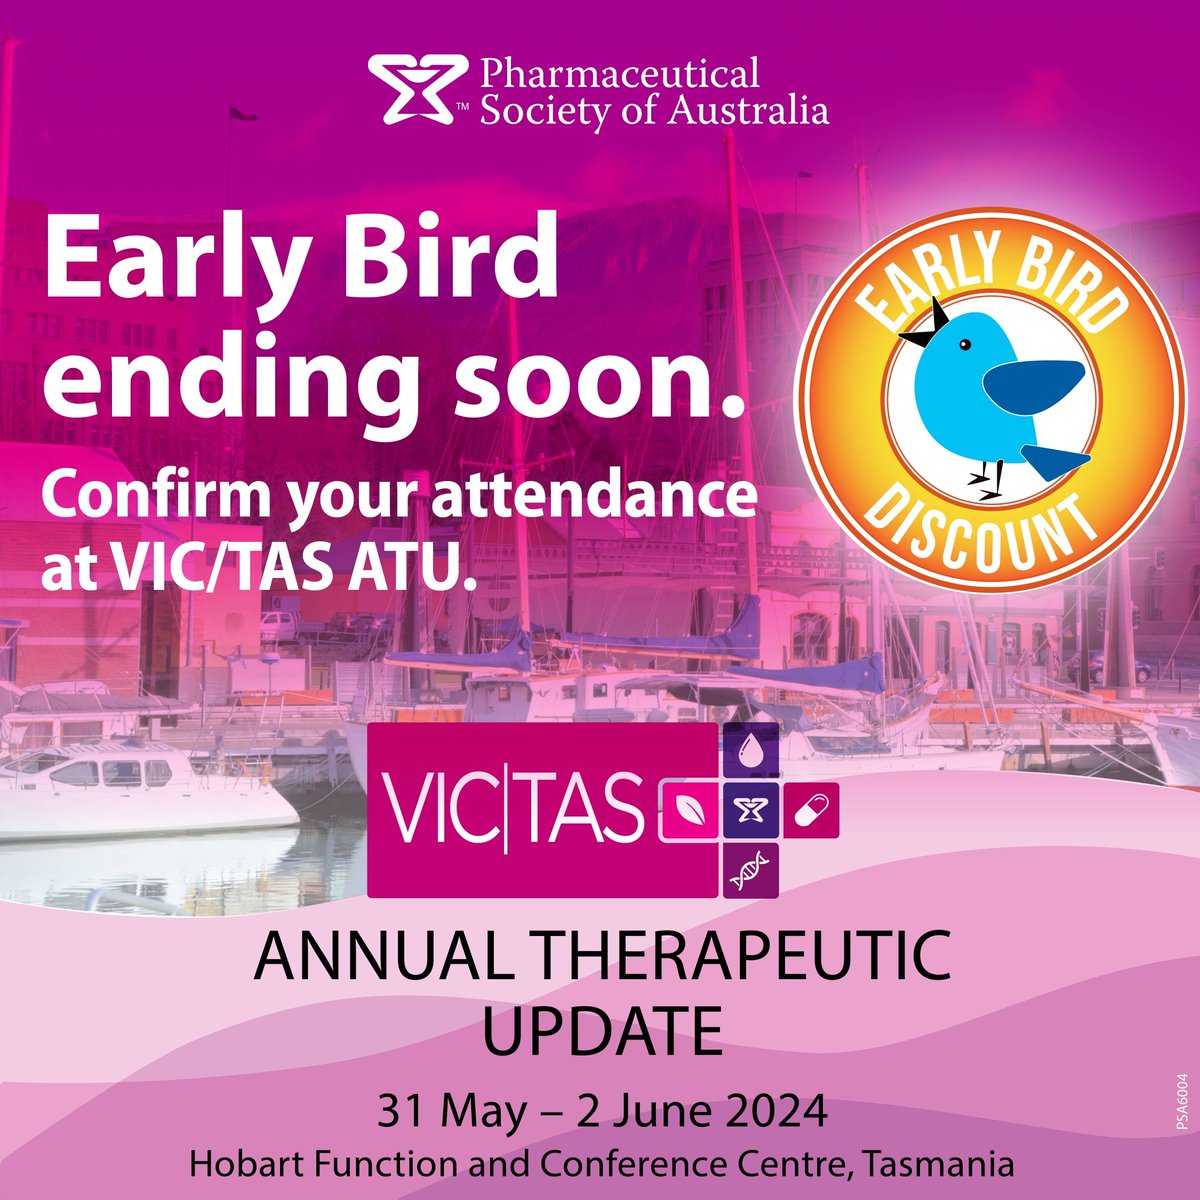 Last Call for Early Bird Rates at VIC/TAS ATU! Secure your spot by April 28th and join us in Hobart from May 31st to June 2nd. Don't miss out on advanced clinical education, invaluable networking, and the chance to meet industry leaders. Register today: buff.ly/4a89P6D